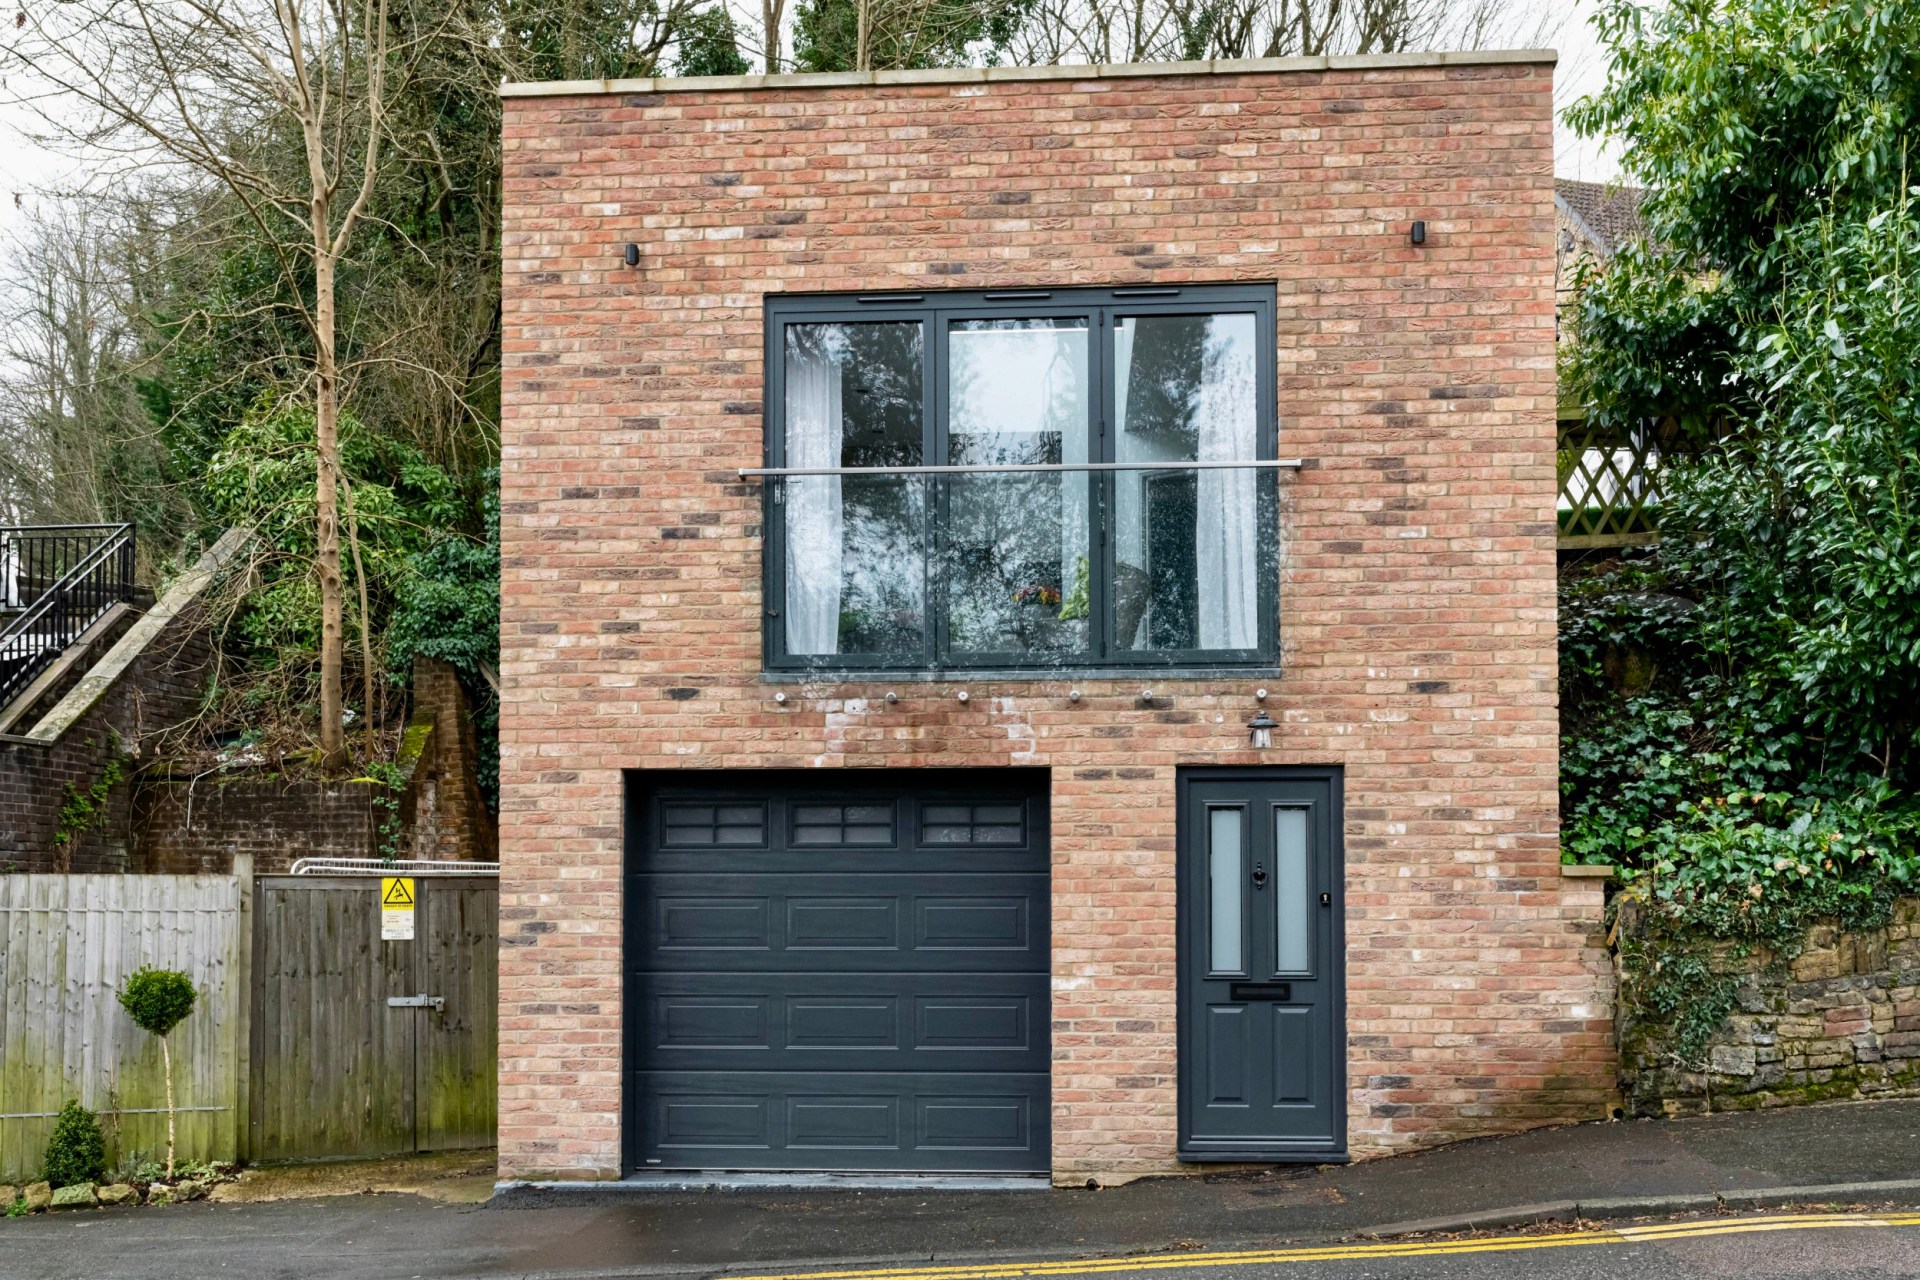 i turned a derelict garage that was being used as a toilet into a two-bed home